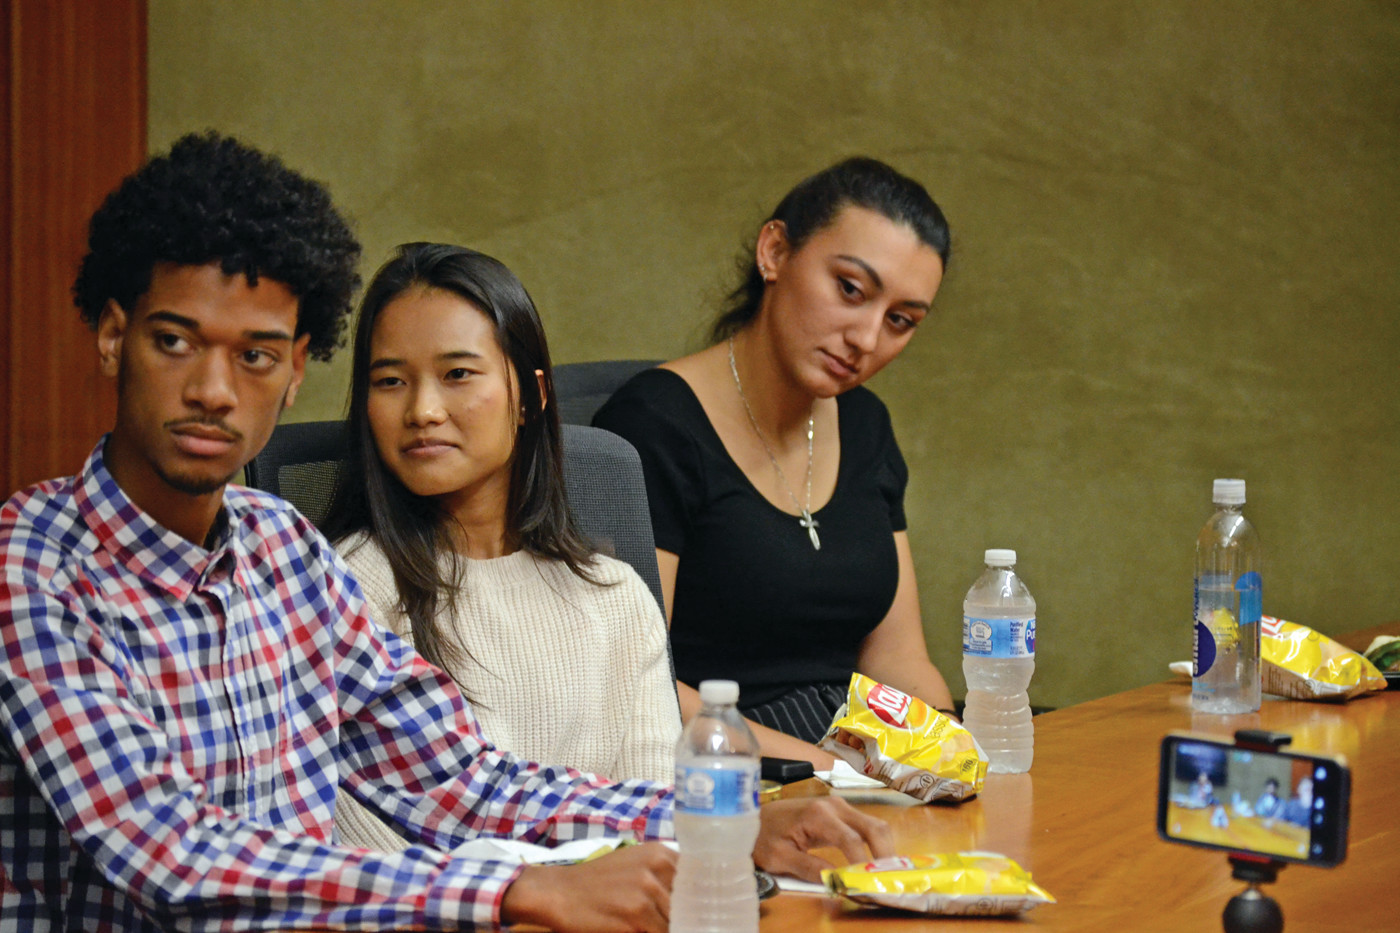 PROMISE IN PROGRESS: (l-r) David Mota of Pawtucket, Chantrea Heang of Warwick and Marissa Stevenson of Tiverton listen to CCRI President Meghan Hughes during the roundtable.